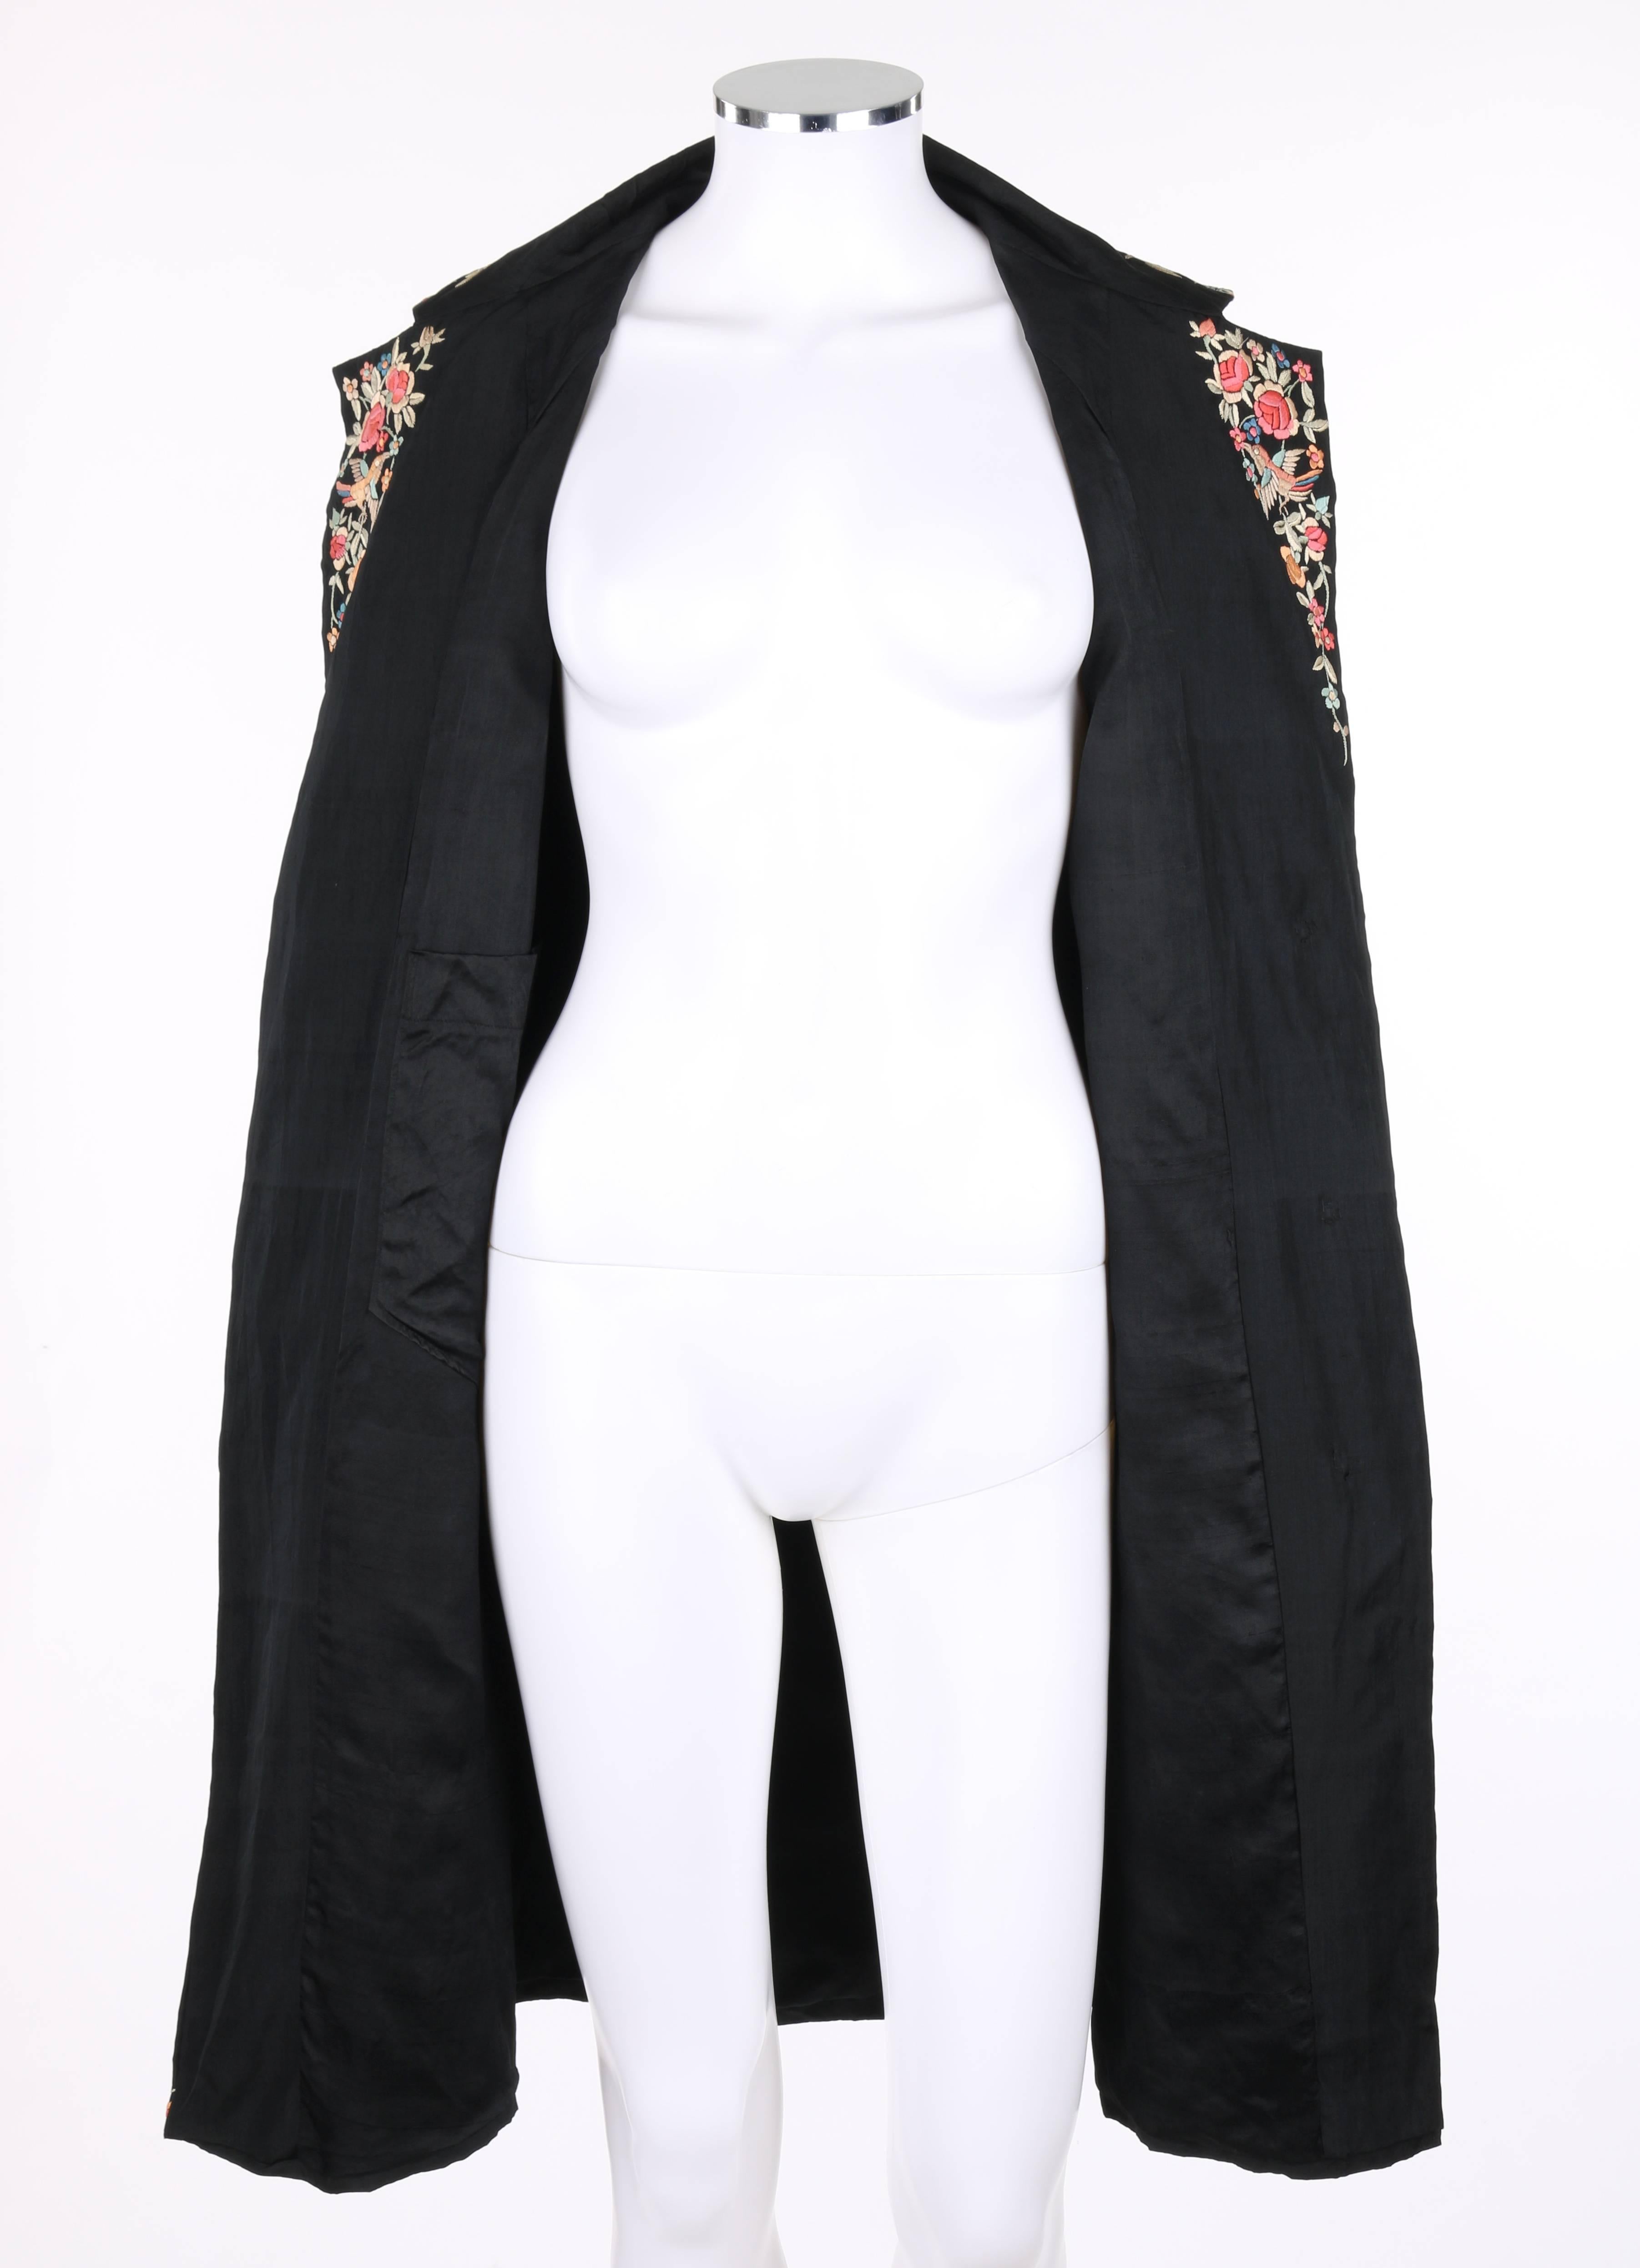 COUTURE c.1920's Black Silk Multicolored Chinese Floral Hand Embroidered Jacket 2